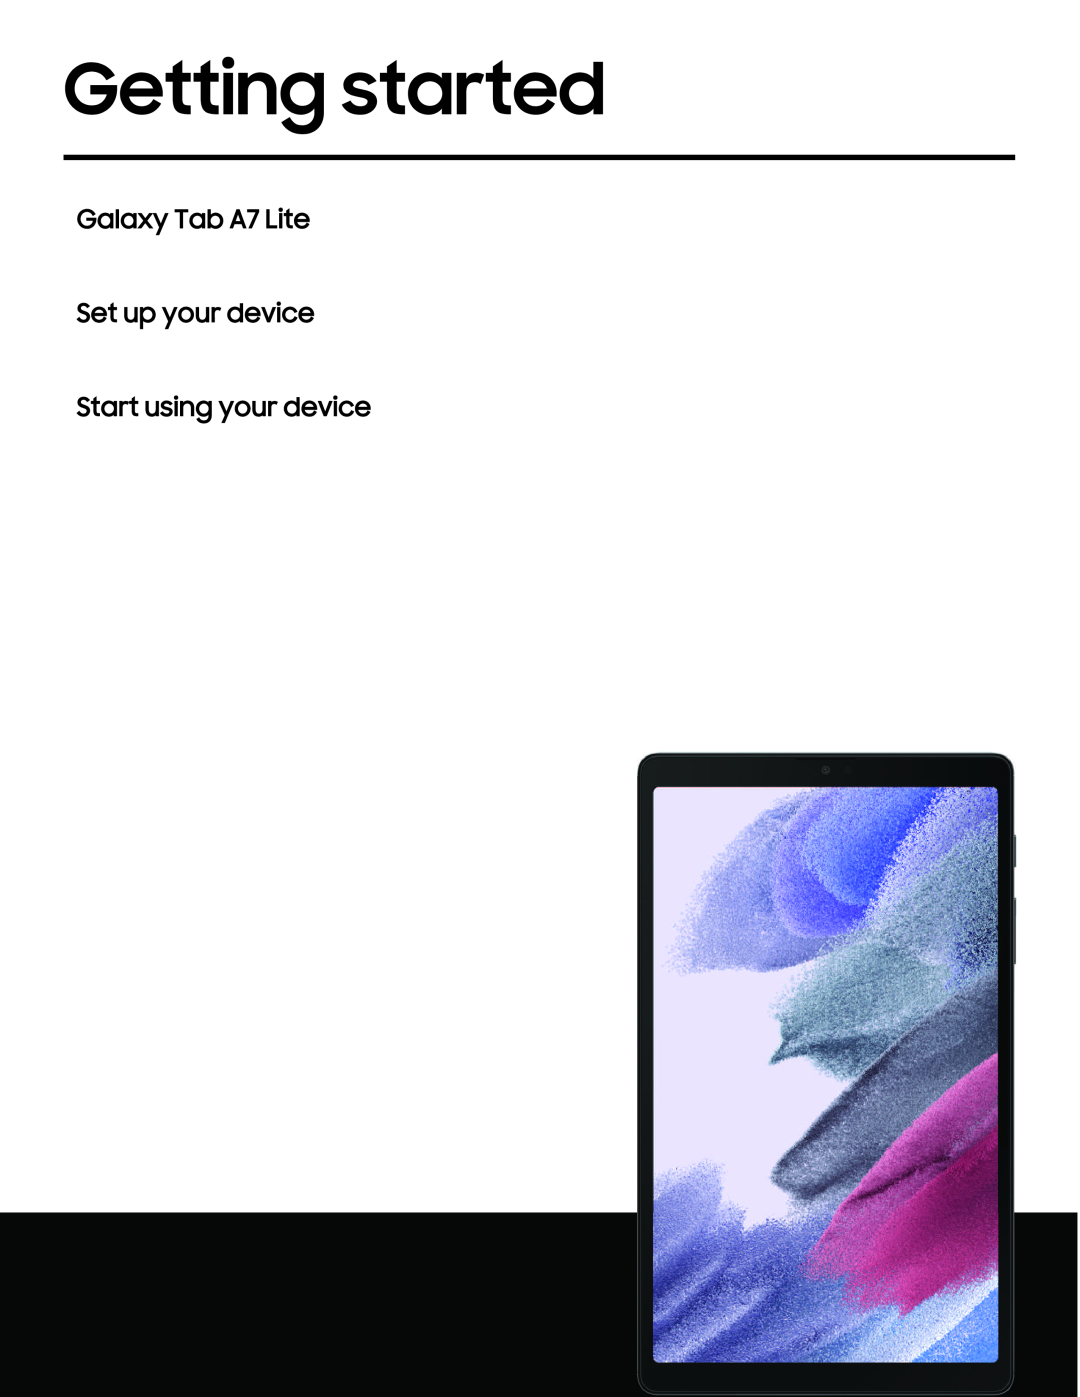 Getting started Galaxy Tab A7 Lite T-Mobile